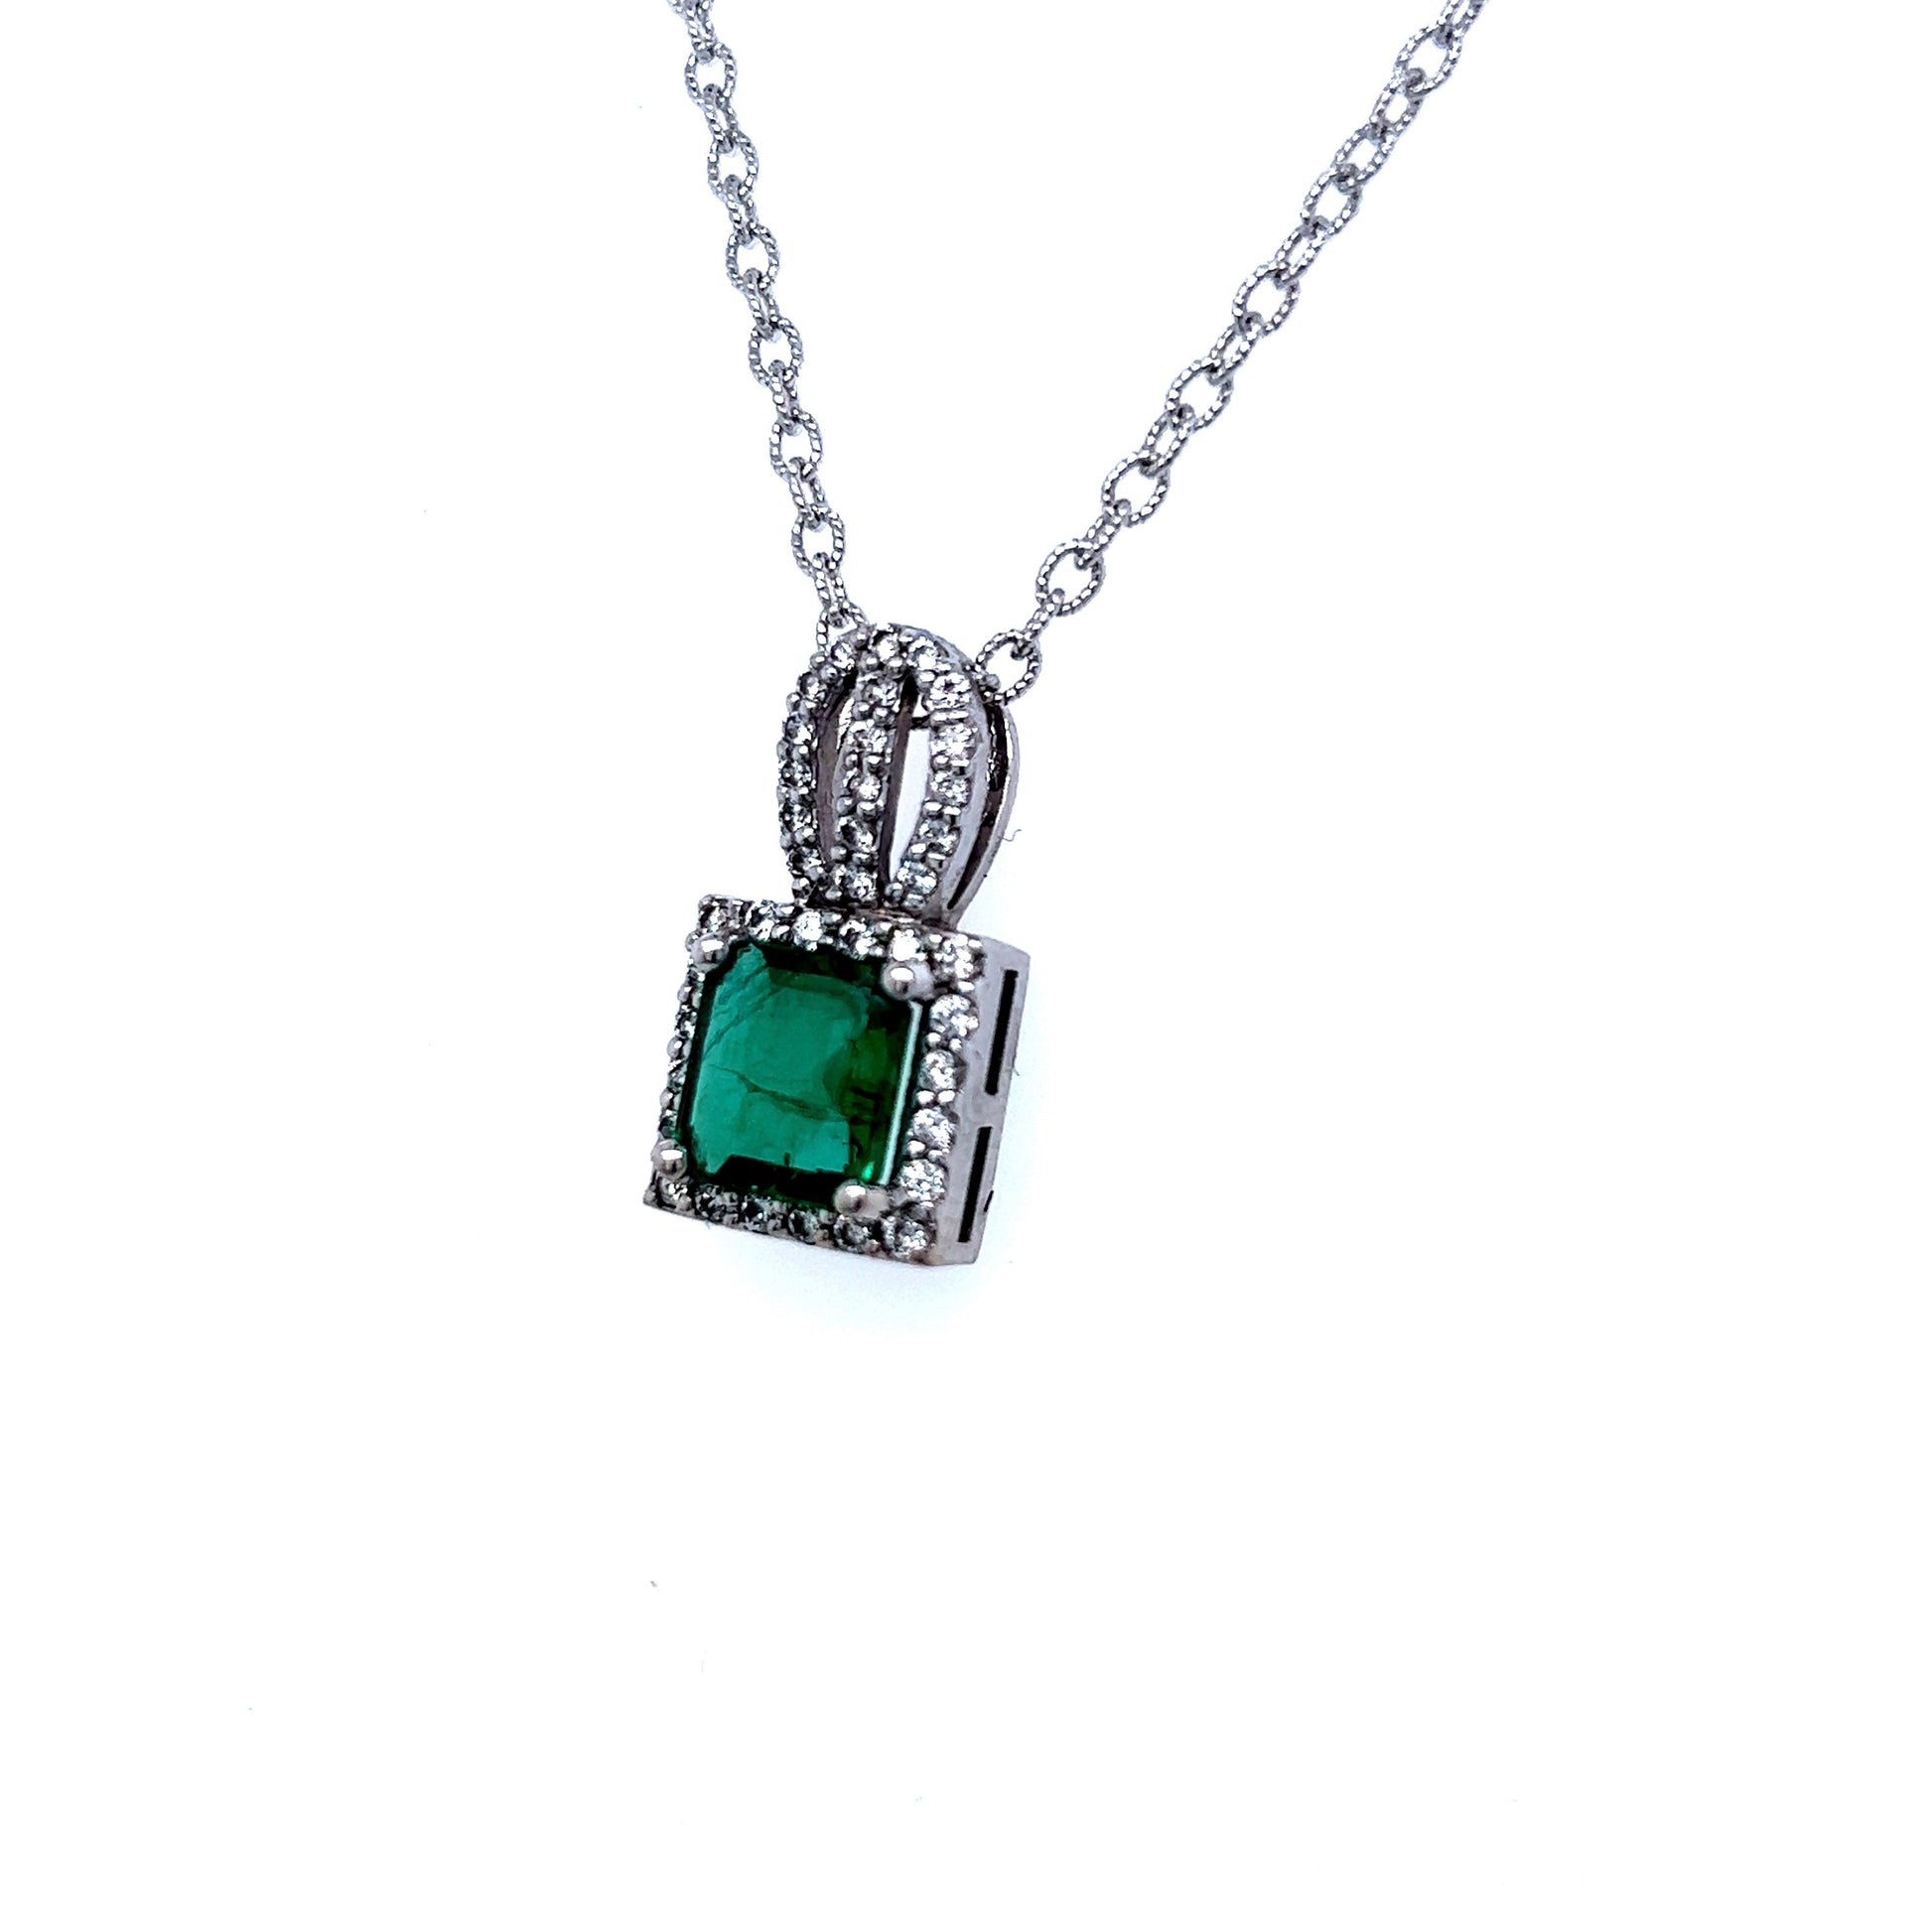 Natural Emerald Diamond Pendant Necklace 18" 14k White Gold 2.41 TCW Certified $8,975 215427 - Certified Fine Jewelry